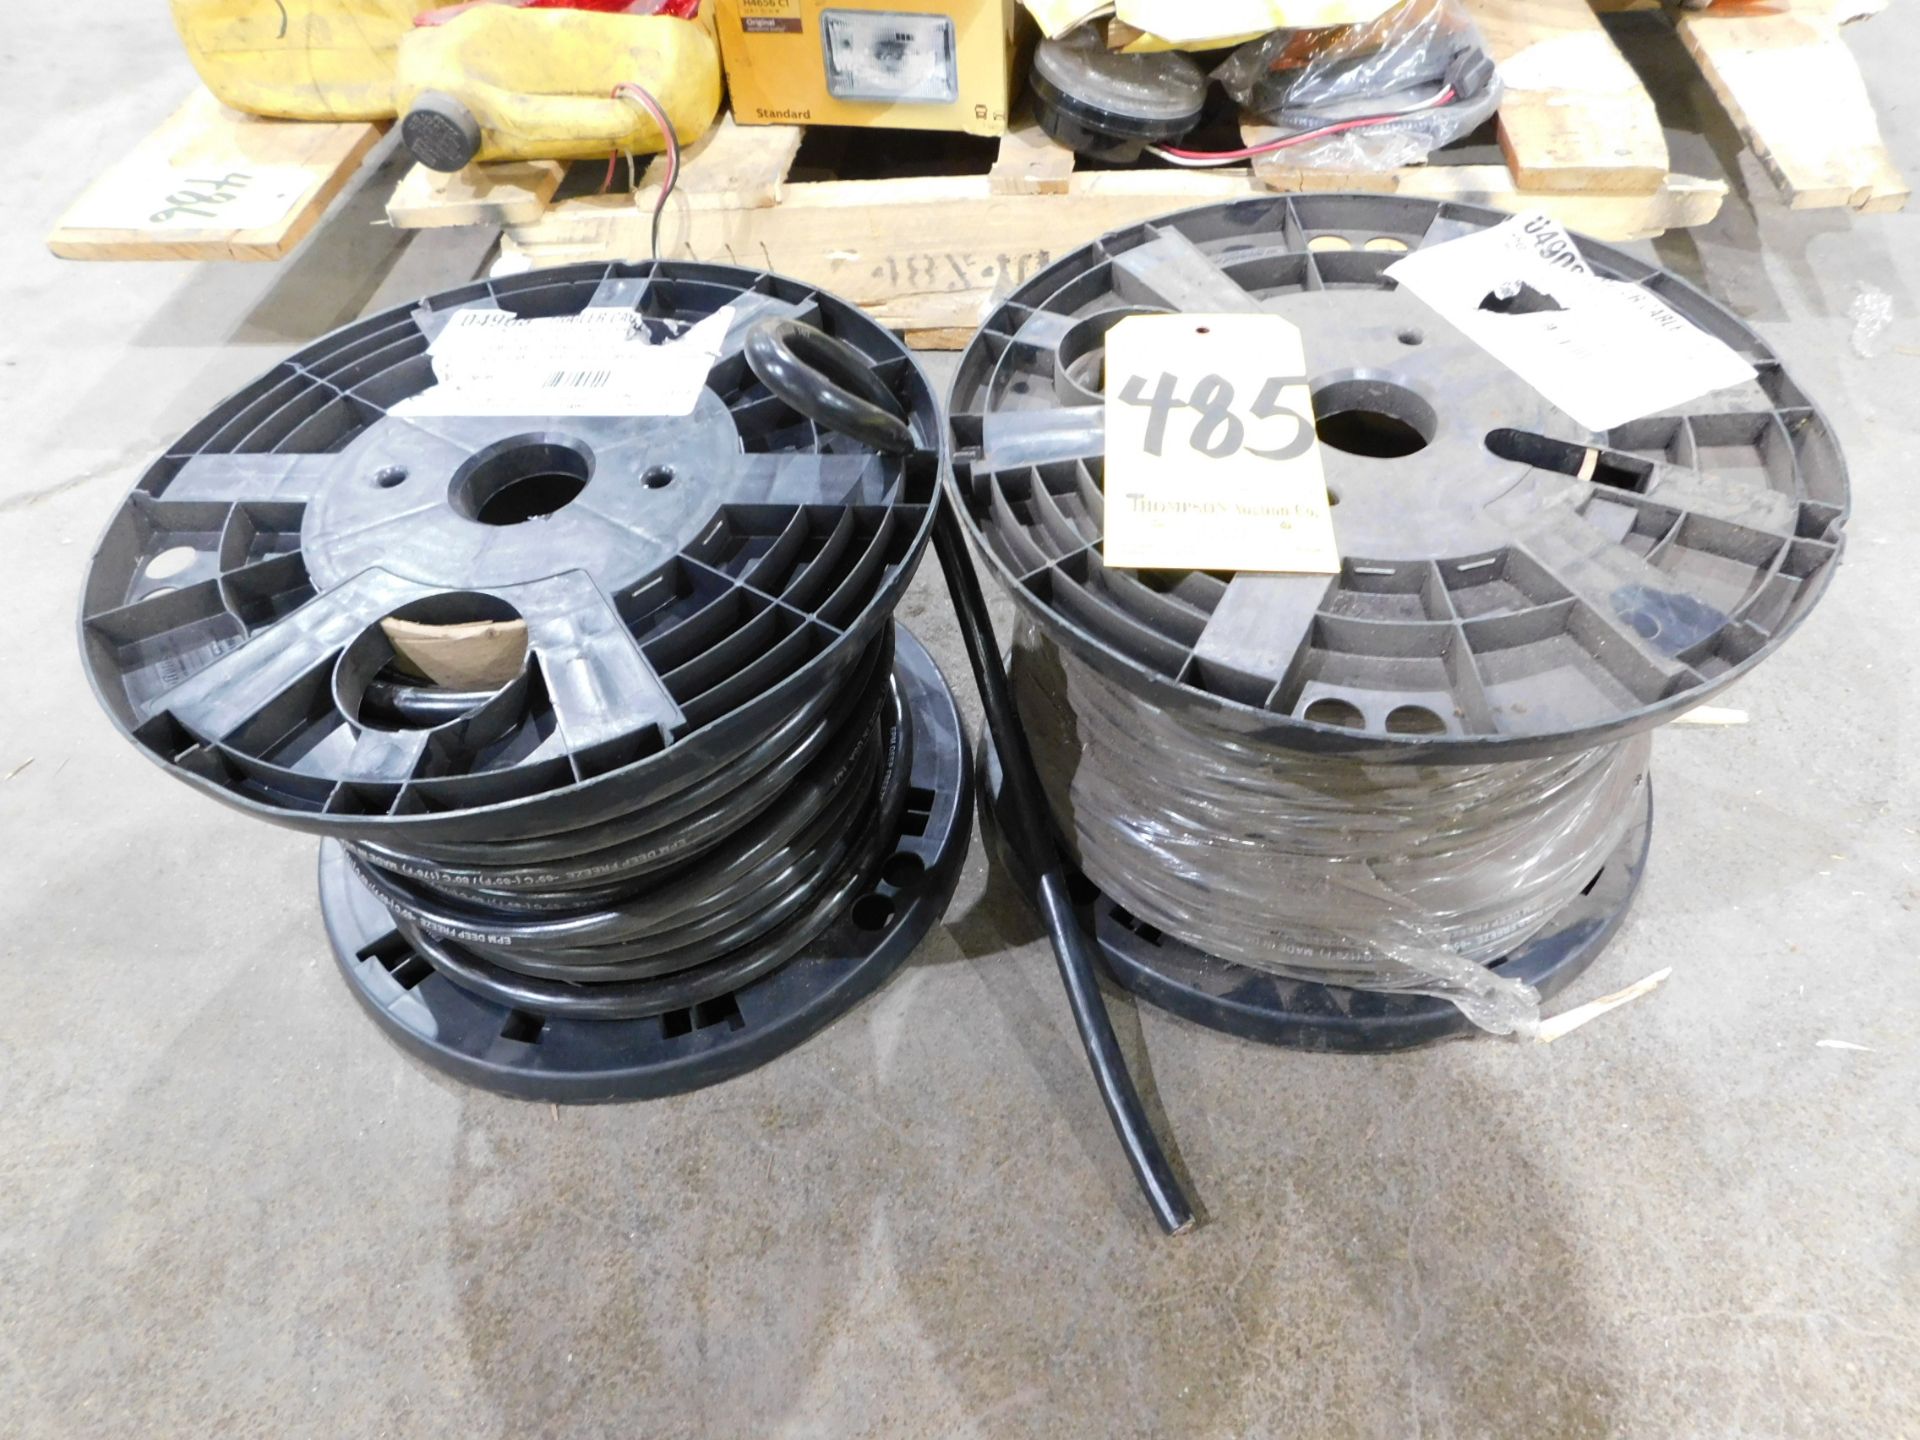 (2) Spools of Trailer Electrical Cable, 14 Ga.-7 Wire, Approx 175 ft. of Cable